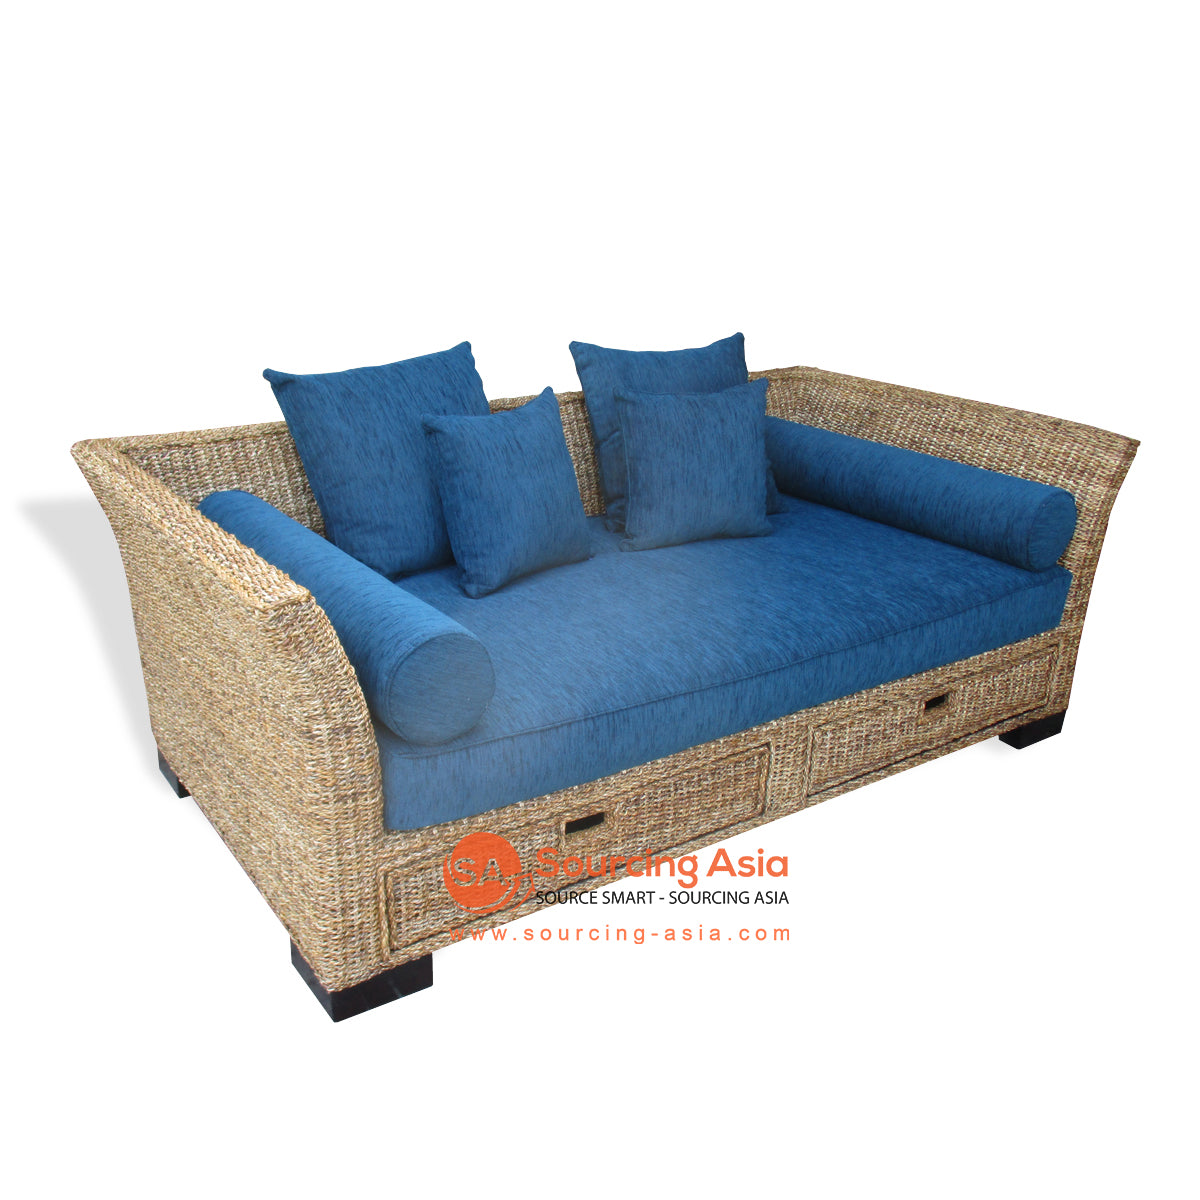 IMAL300-SB-DRW NATURAL BANANA FIBER ARJUNA DAY BED SOFA WITH TWO DRAWERS (PRICE WITHOUT CUSHION)